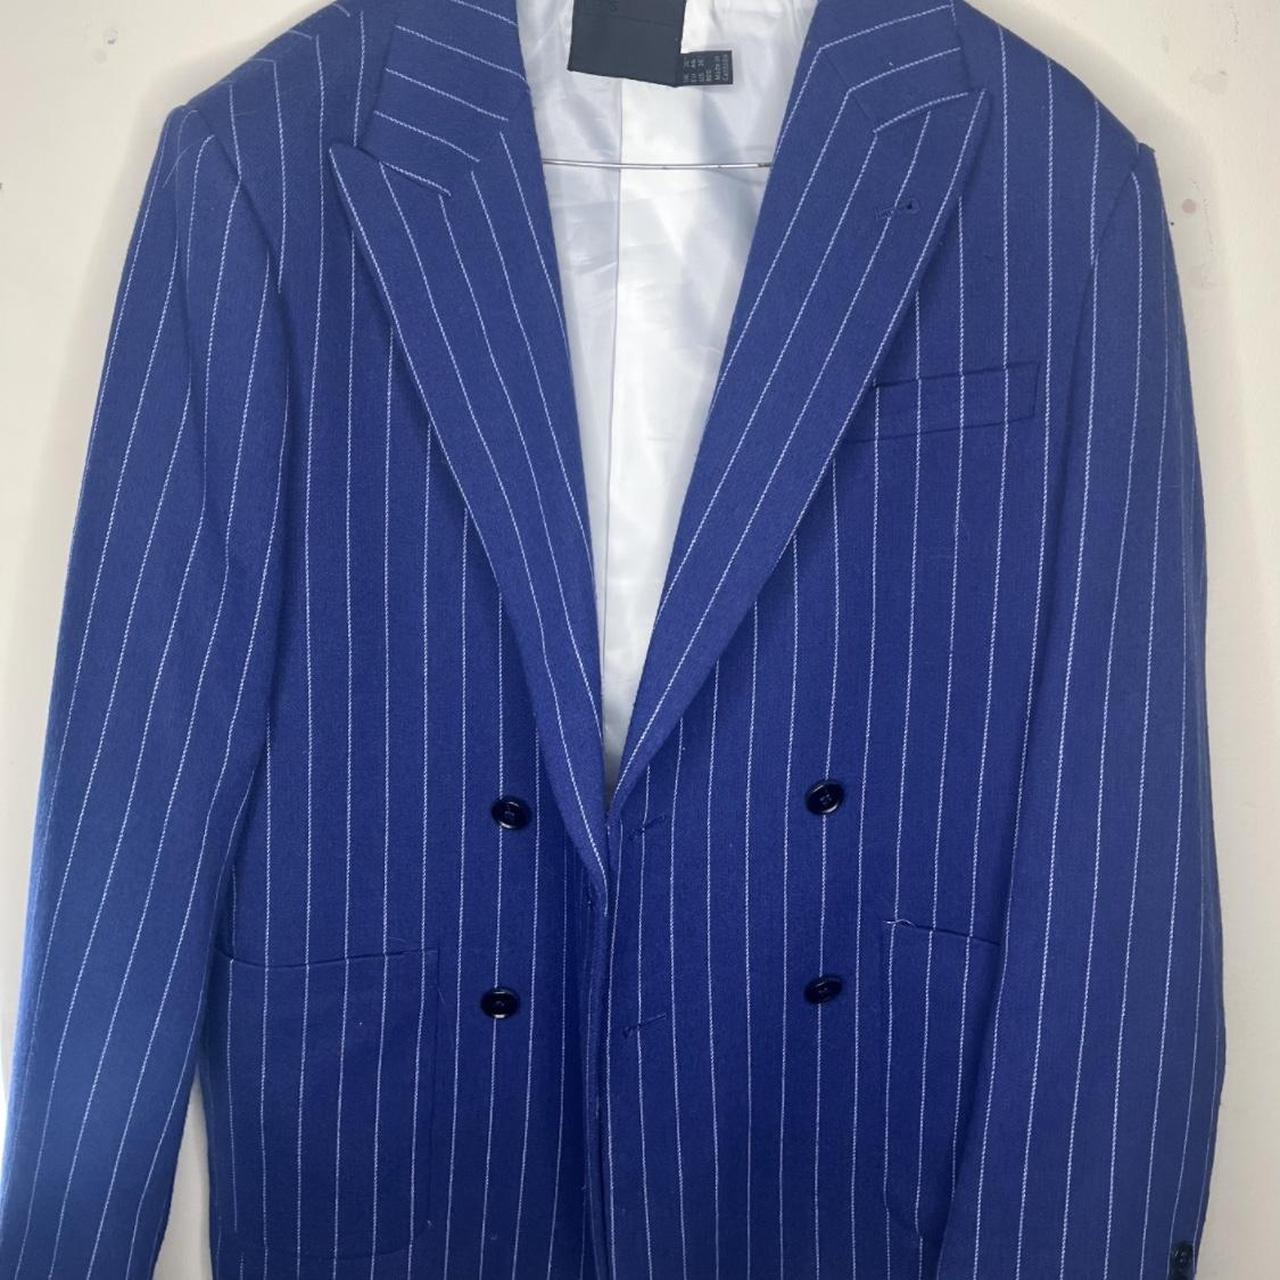 💙🔵🌀 60s style royal blue and white blazer from asos... - Depop